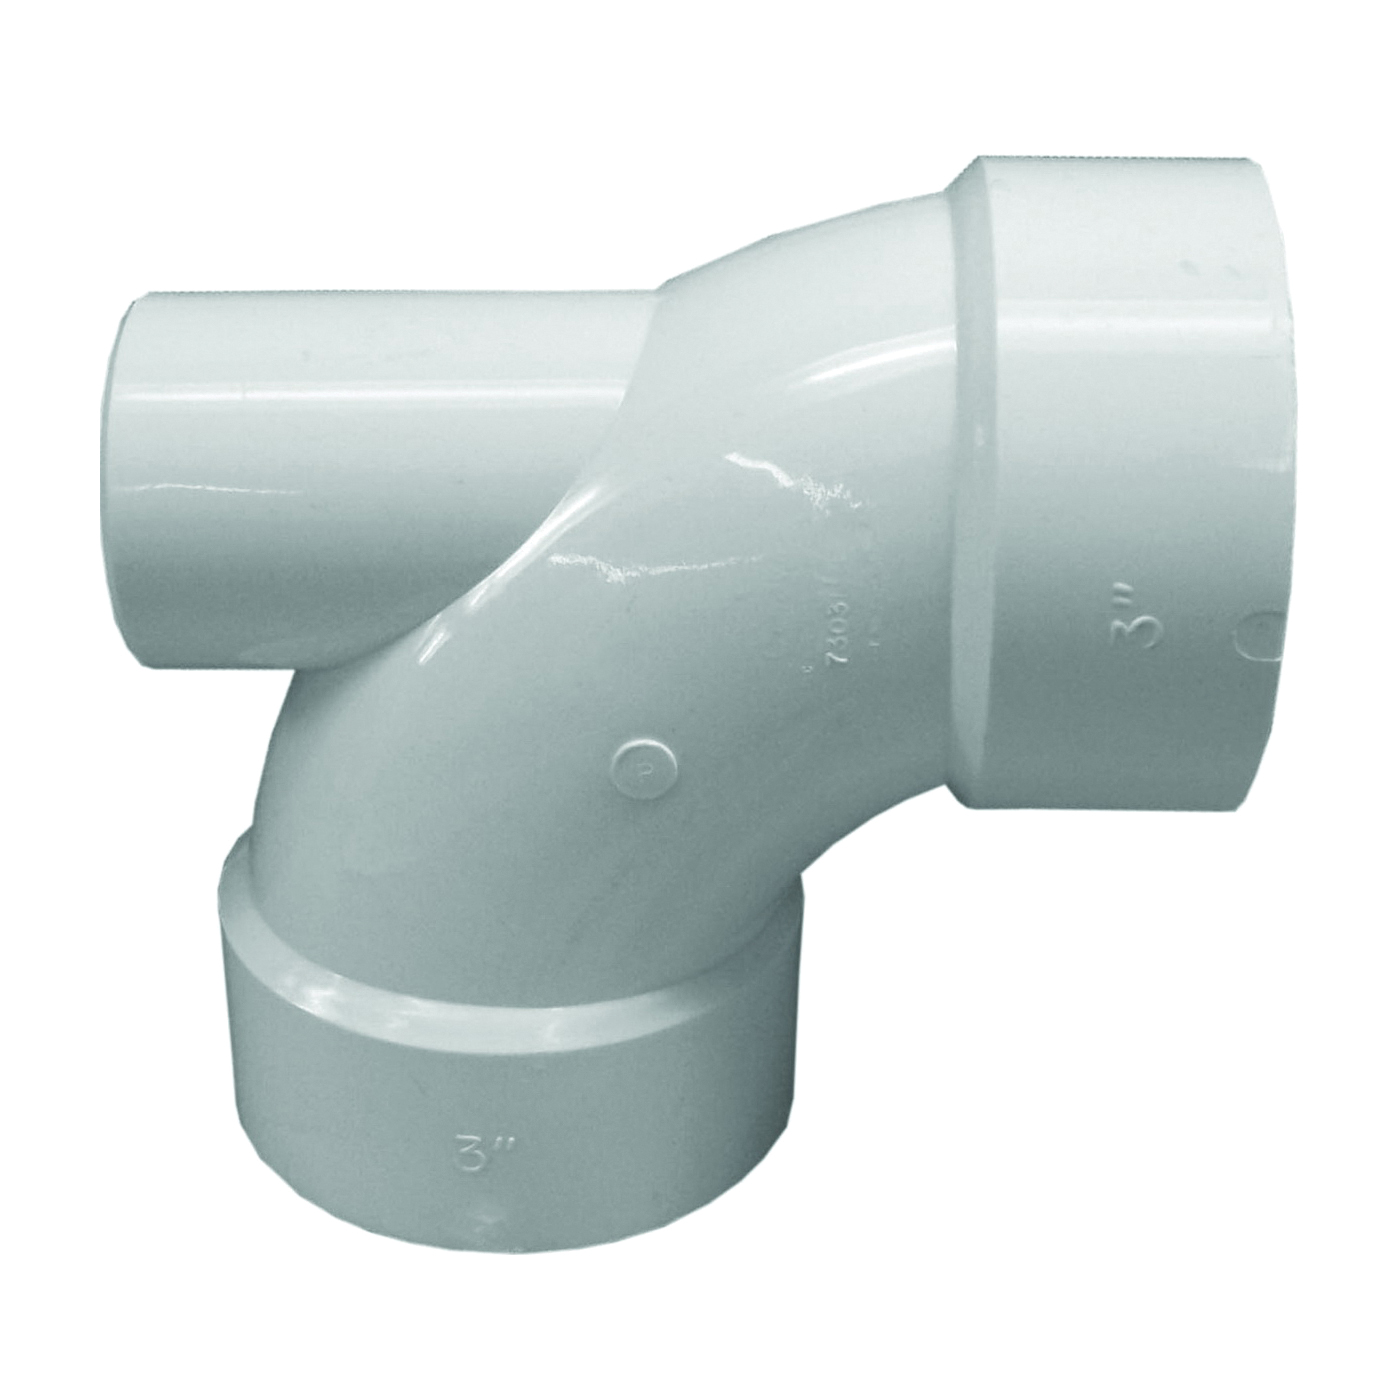 Charlotte Pipe PVC 00303 0600HA Pipe Elbow with Inlet, 3 in, Hub, PVC, White, SCH 40 Schedule